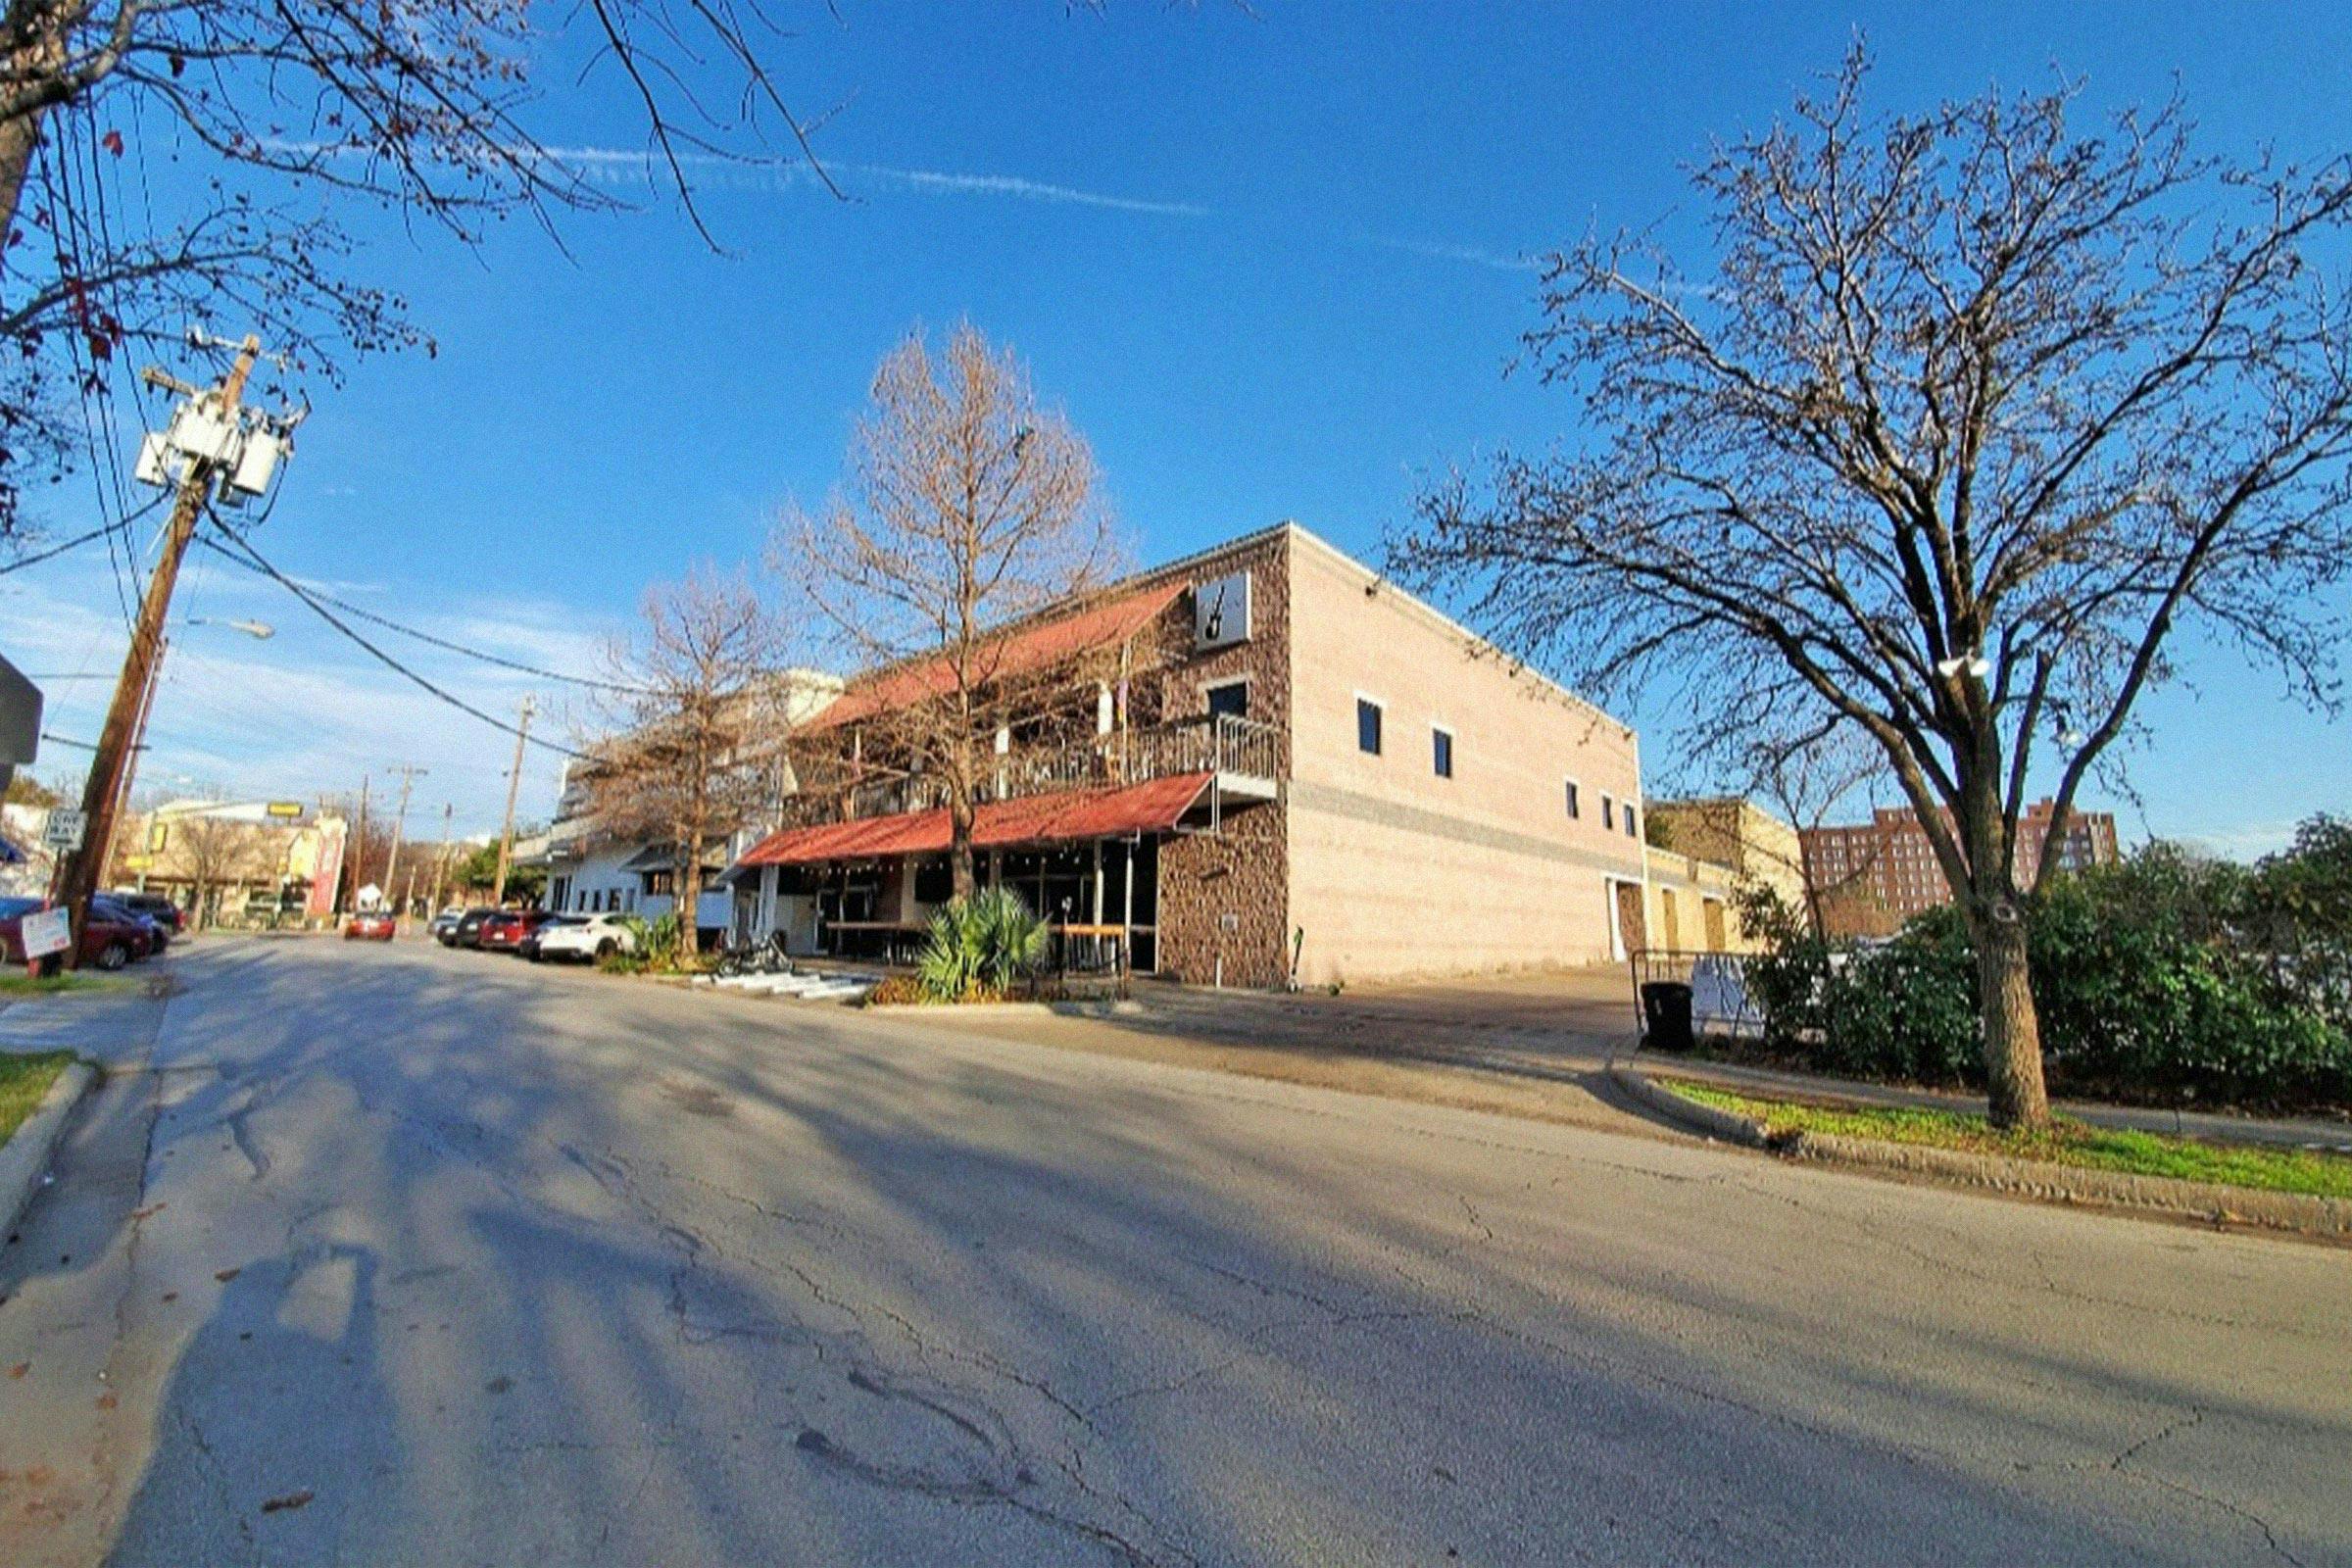 Street view of Sue Ellen's night club with brick exterior and red awnings. 